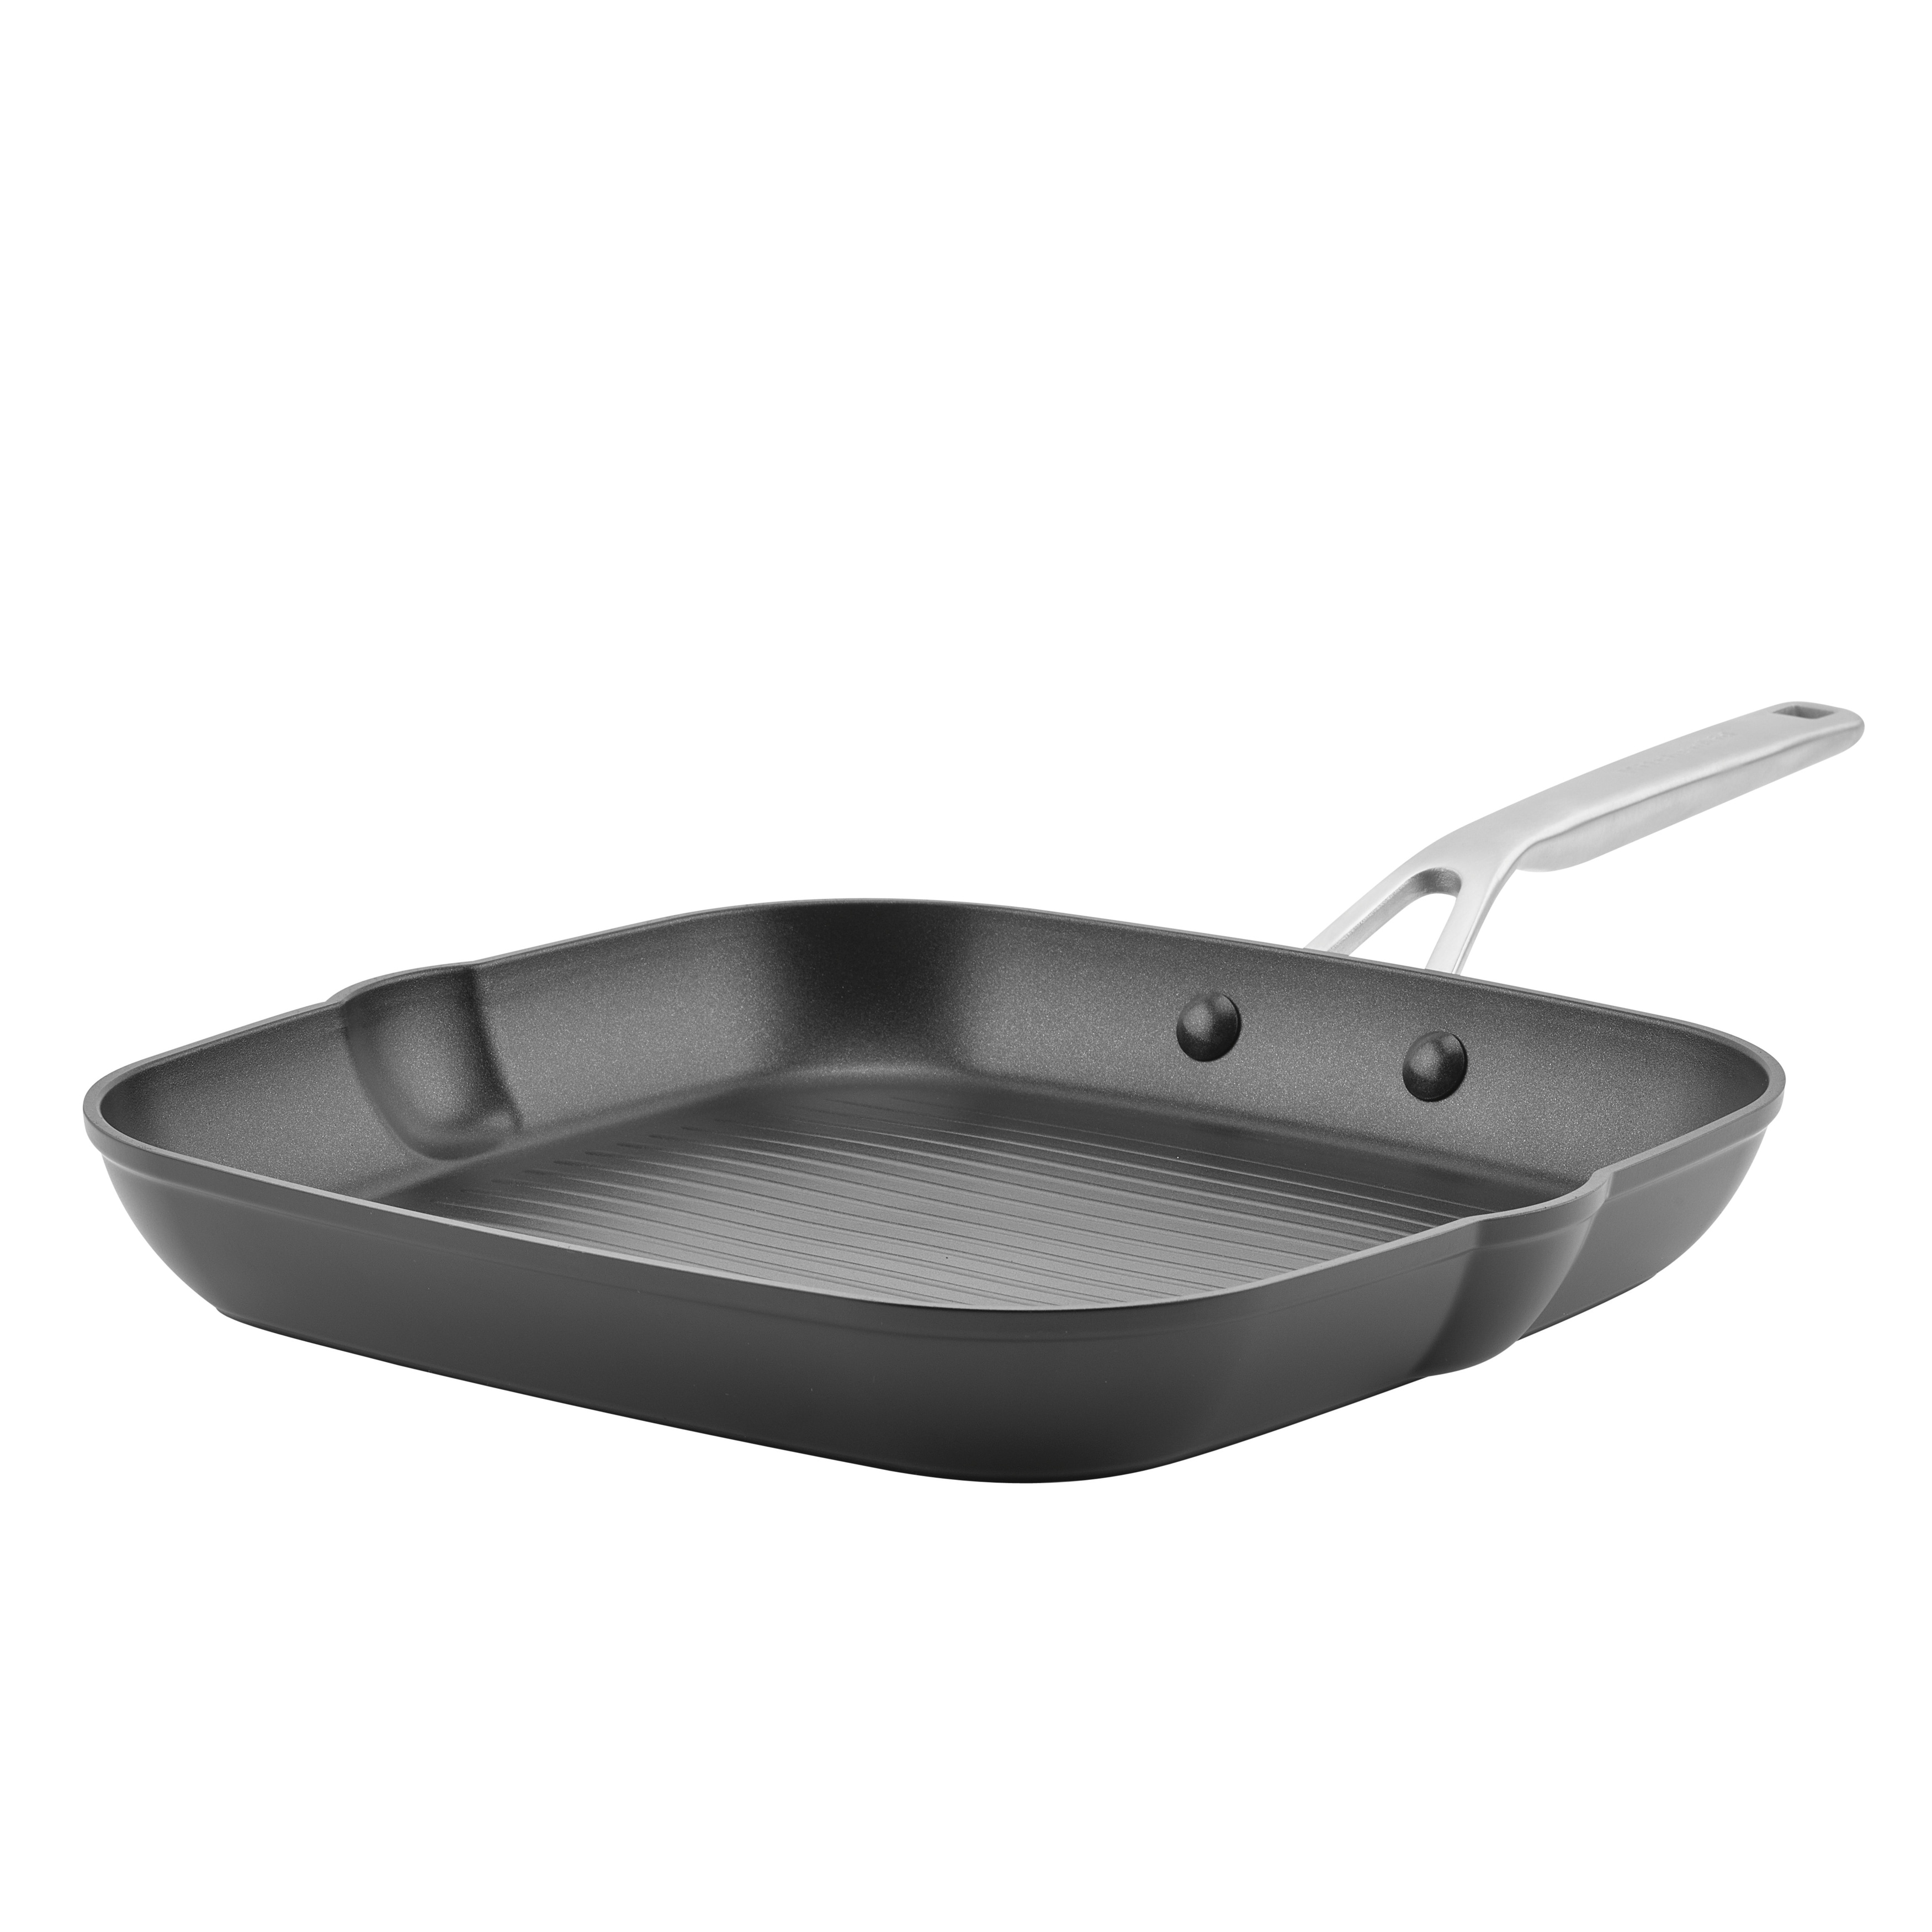 https://ak1.ostkcdn.com/images/products/is/images/direct/762a6b05010c4a9383efcb8d266921a0848fe1b1/KitchenAid-Hard-Anodized-Induction-Nonstick-Stovetop-Grill-Pan%2C-11.25-Inch%2C-Matte-Black.jpg